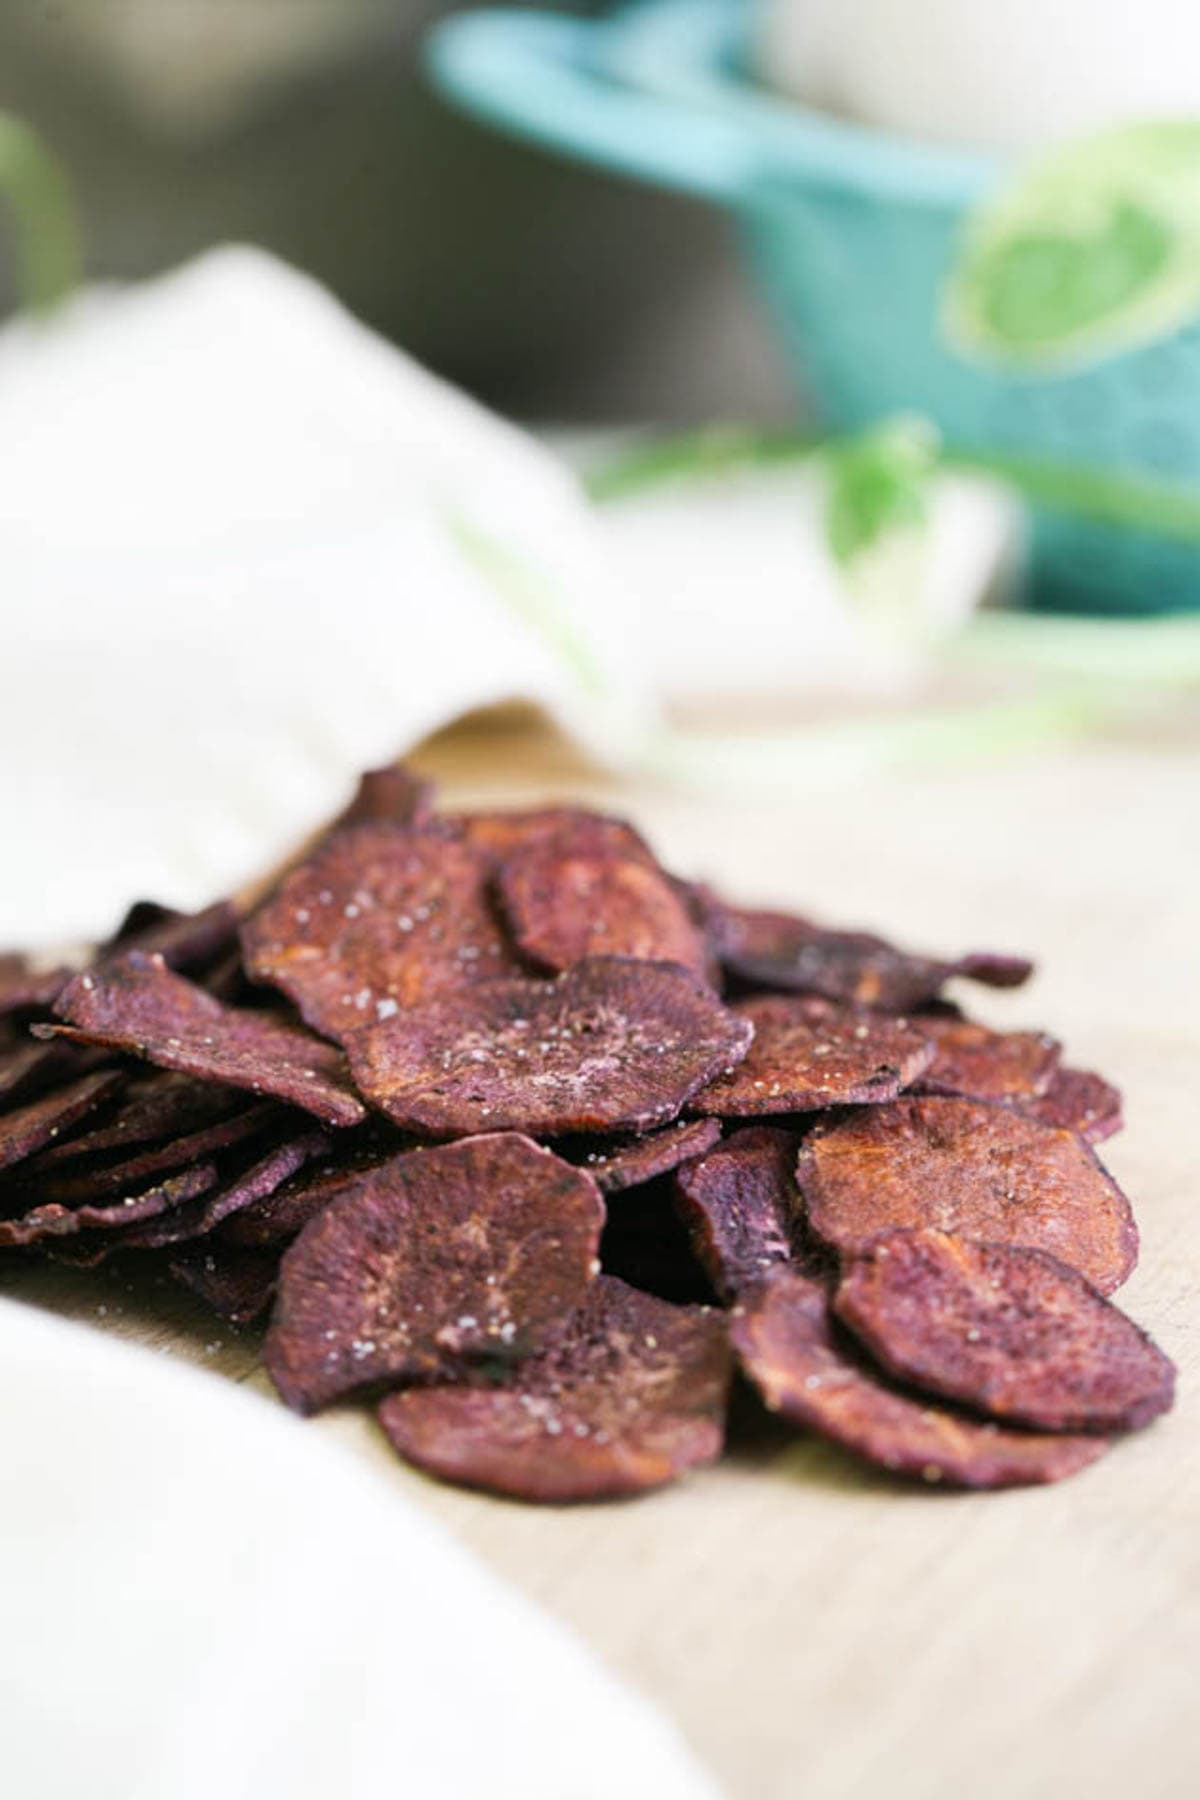 Purple sweet potato chips ready for serving.